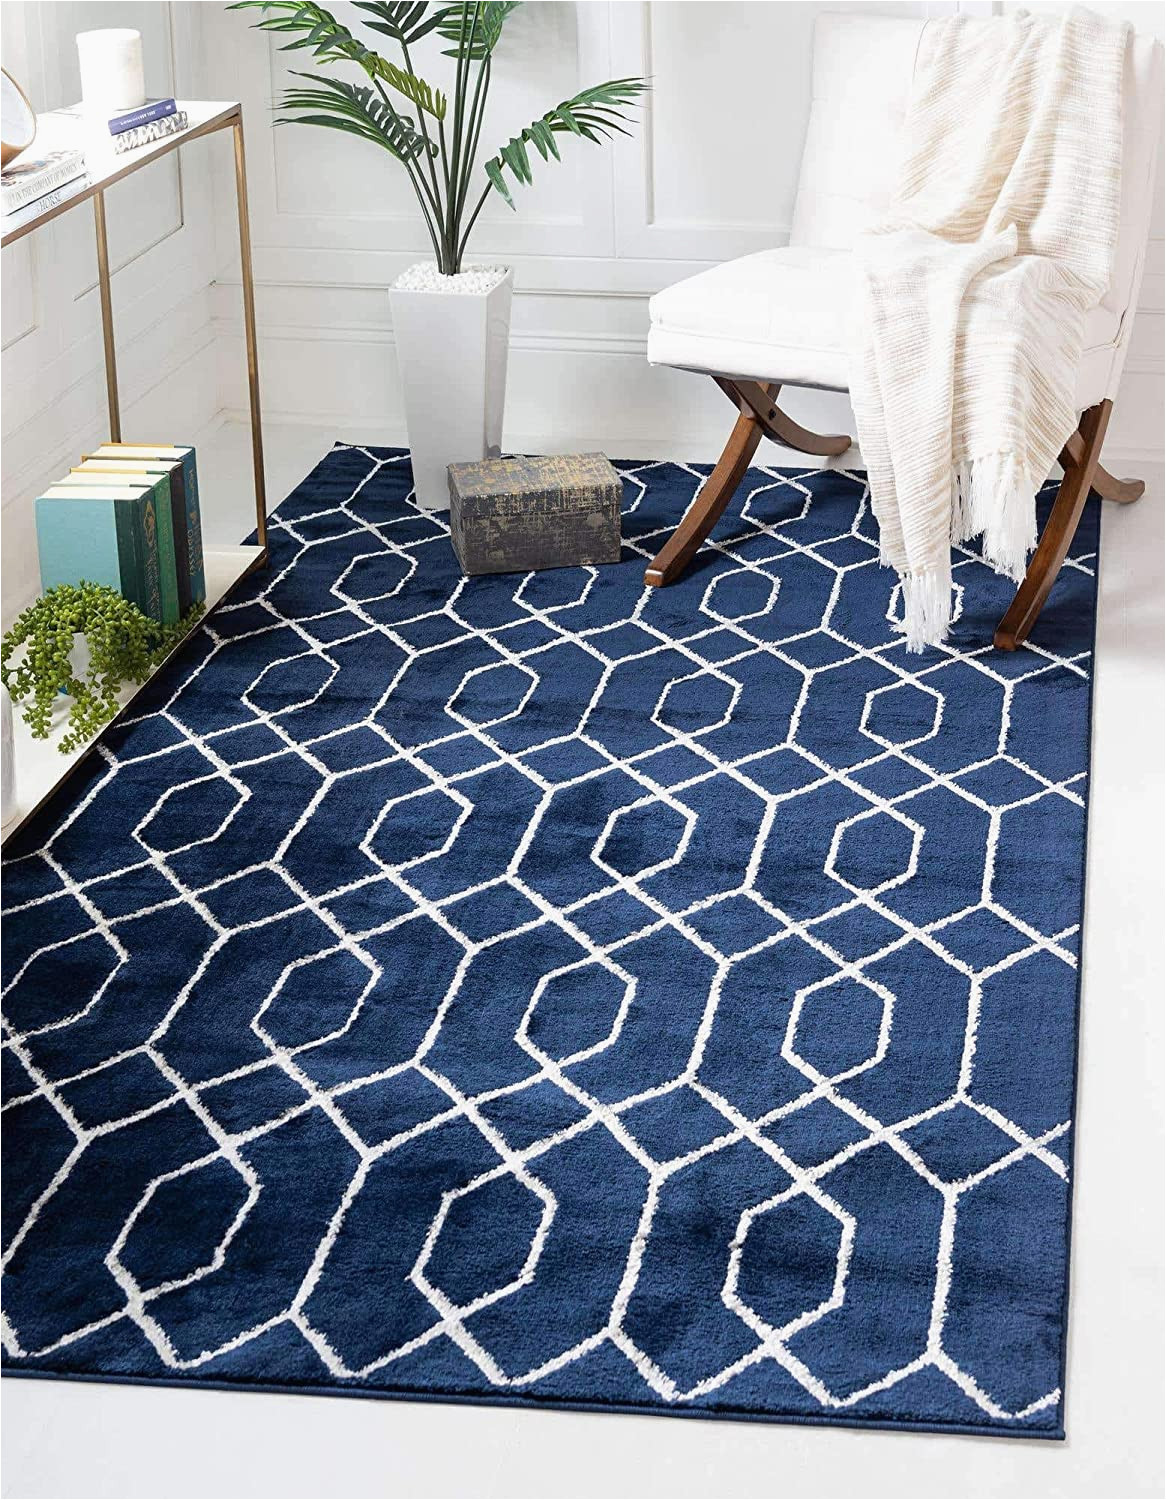 Navy Blue and Silver Rug Unique Loom Marilyn Monroe Glam Collection Textured Geometric Trellis area Rug Mmg003 8 X 10 Feet Navy Blue Silver